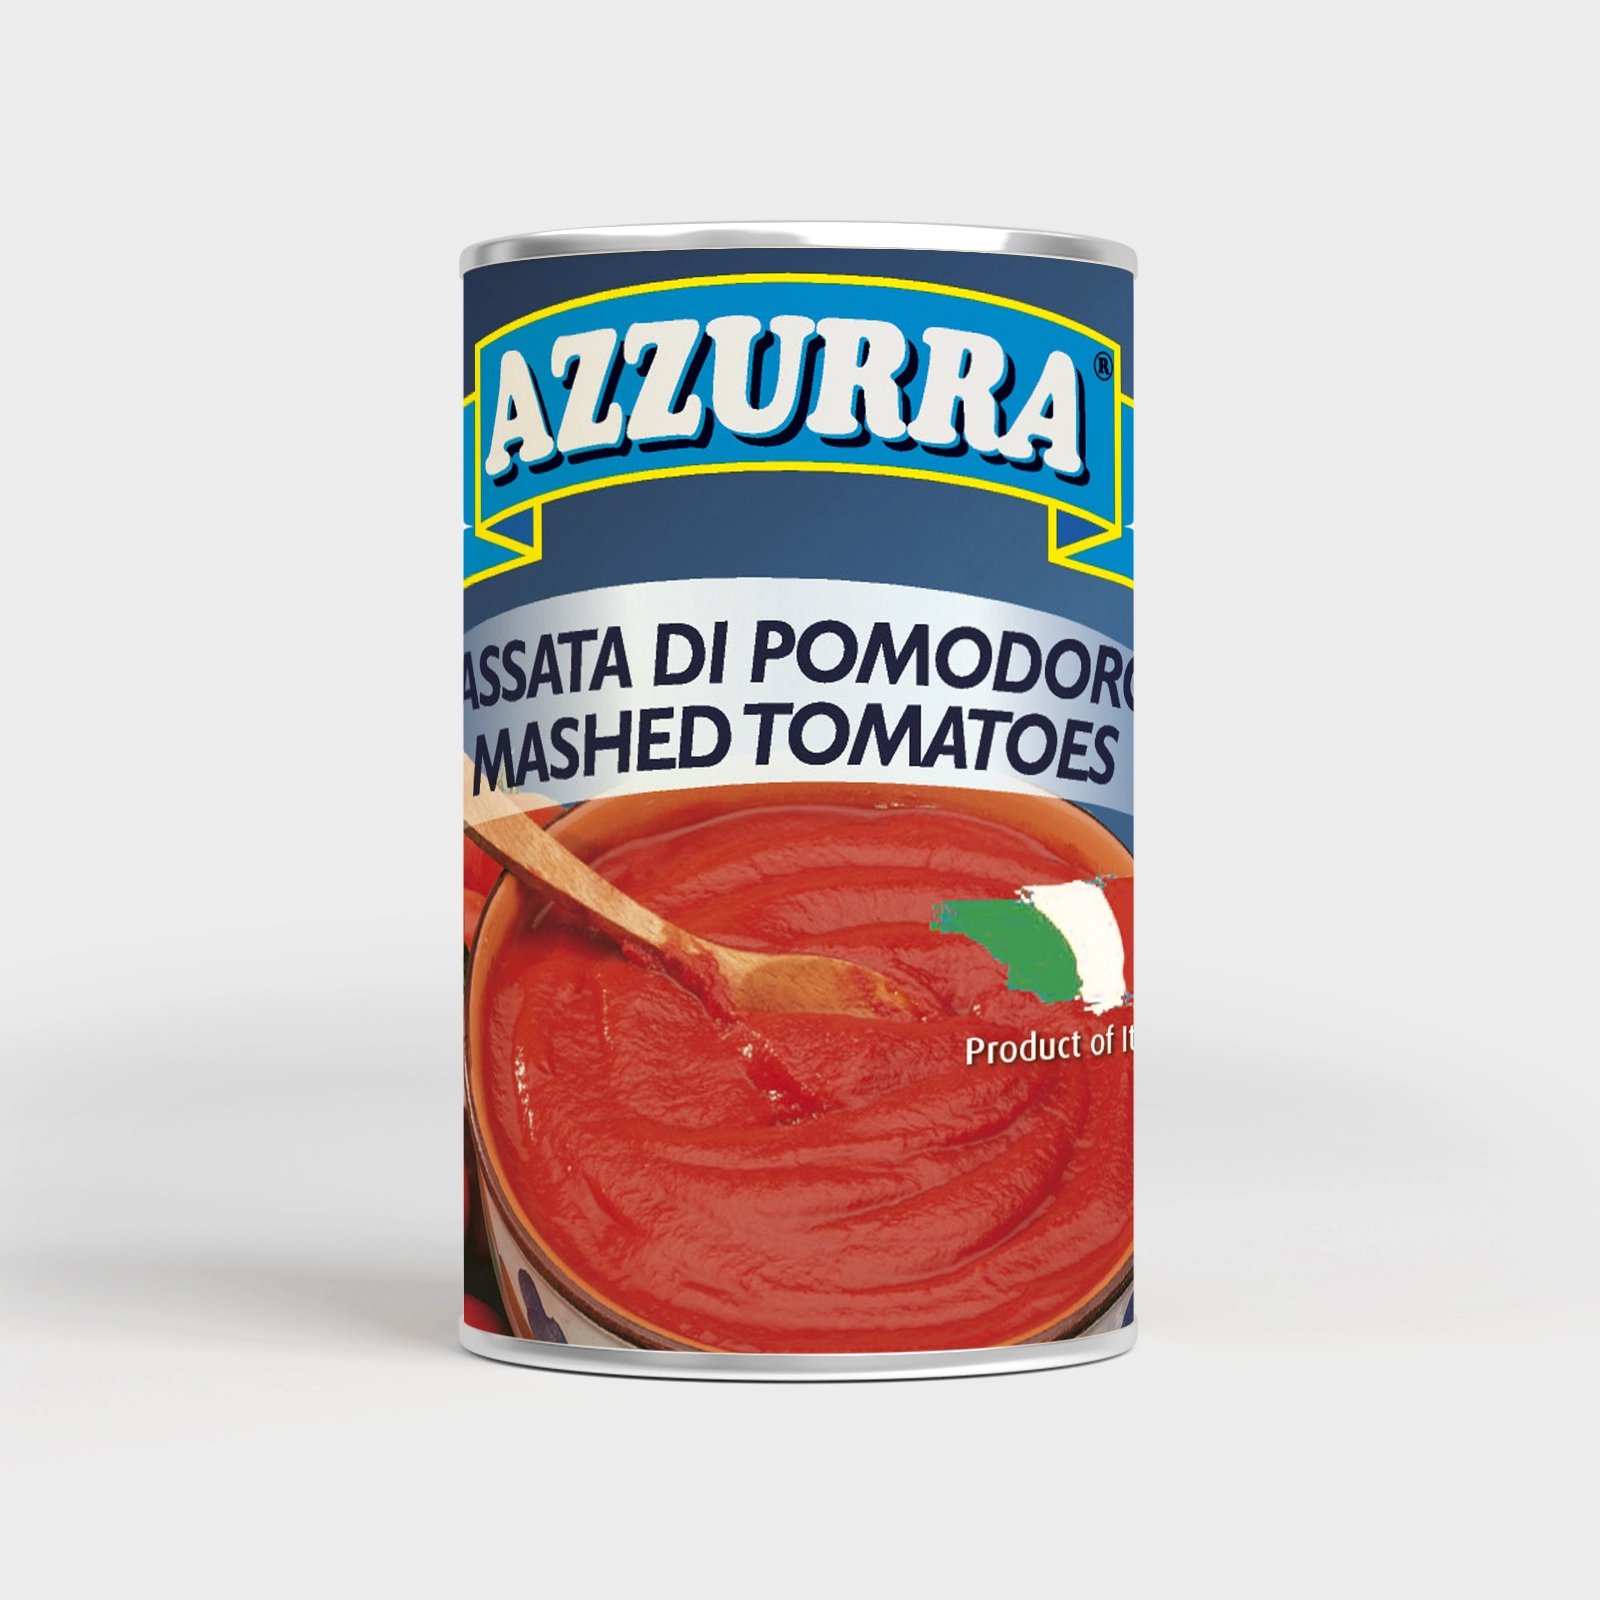 Tomato Puree 400g Azzurra crafted from the finest tomatoes harvested from the sun-drenched fields of Italy